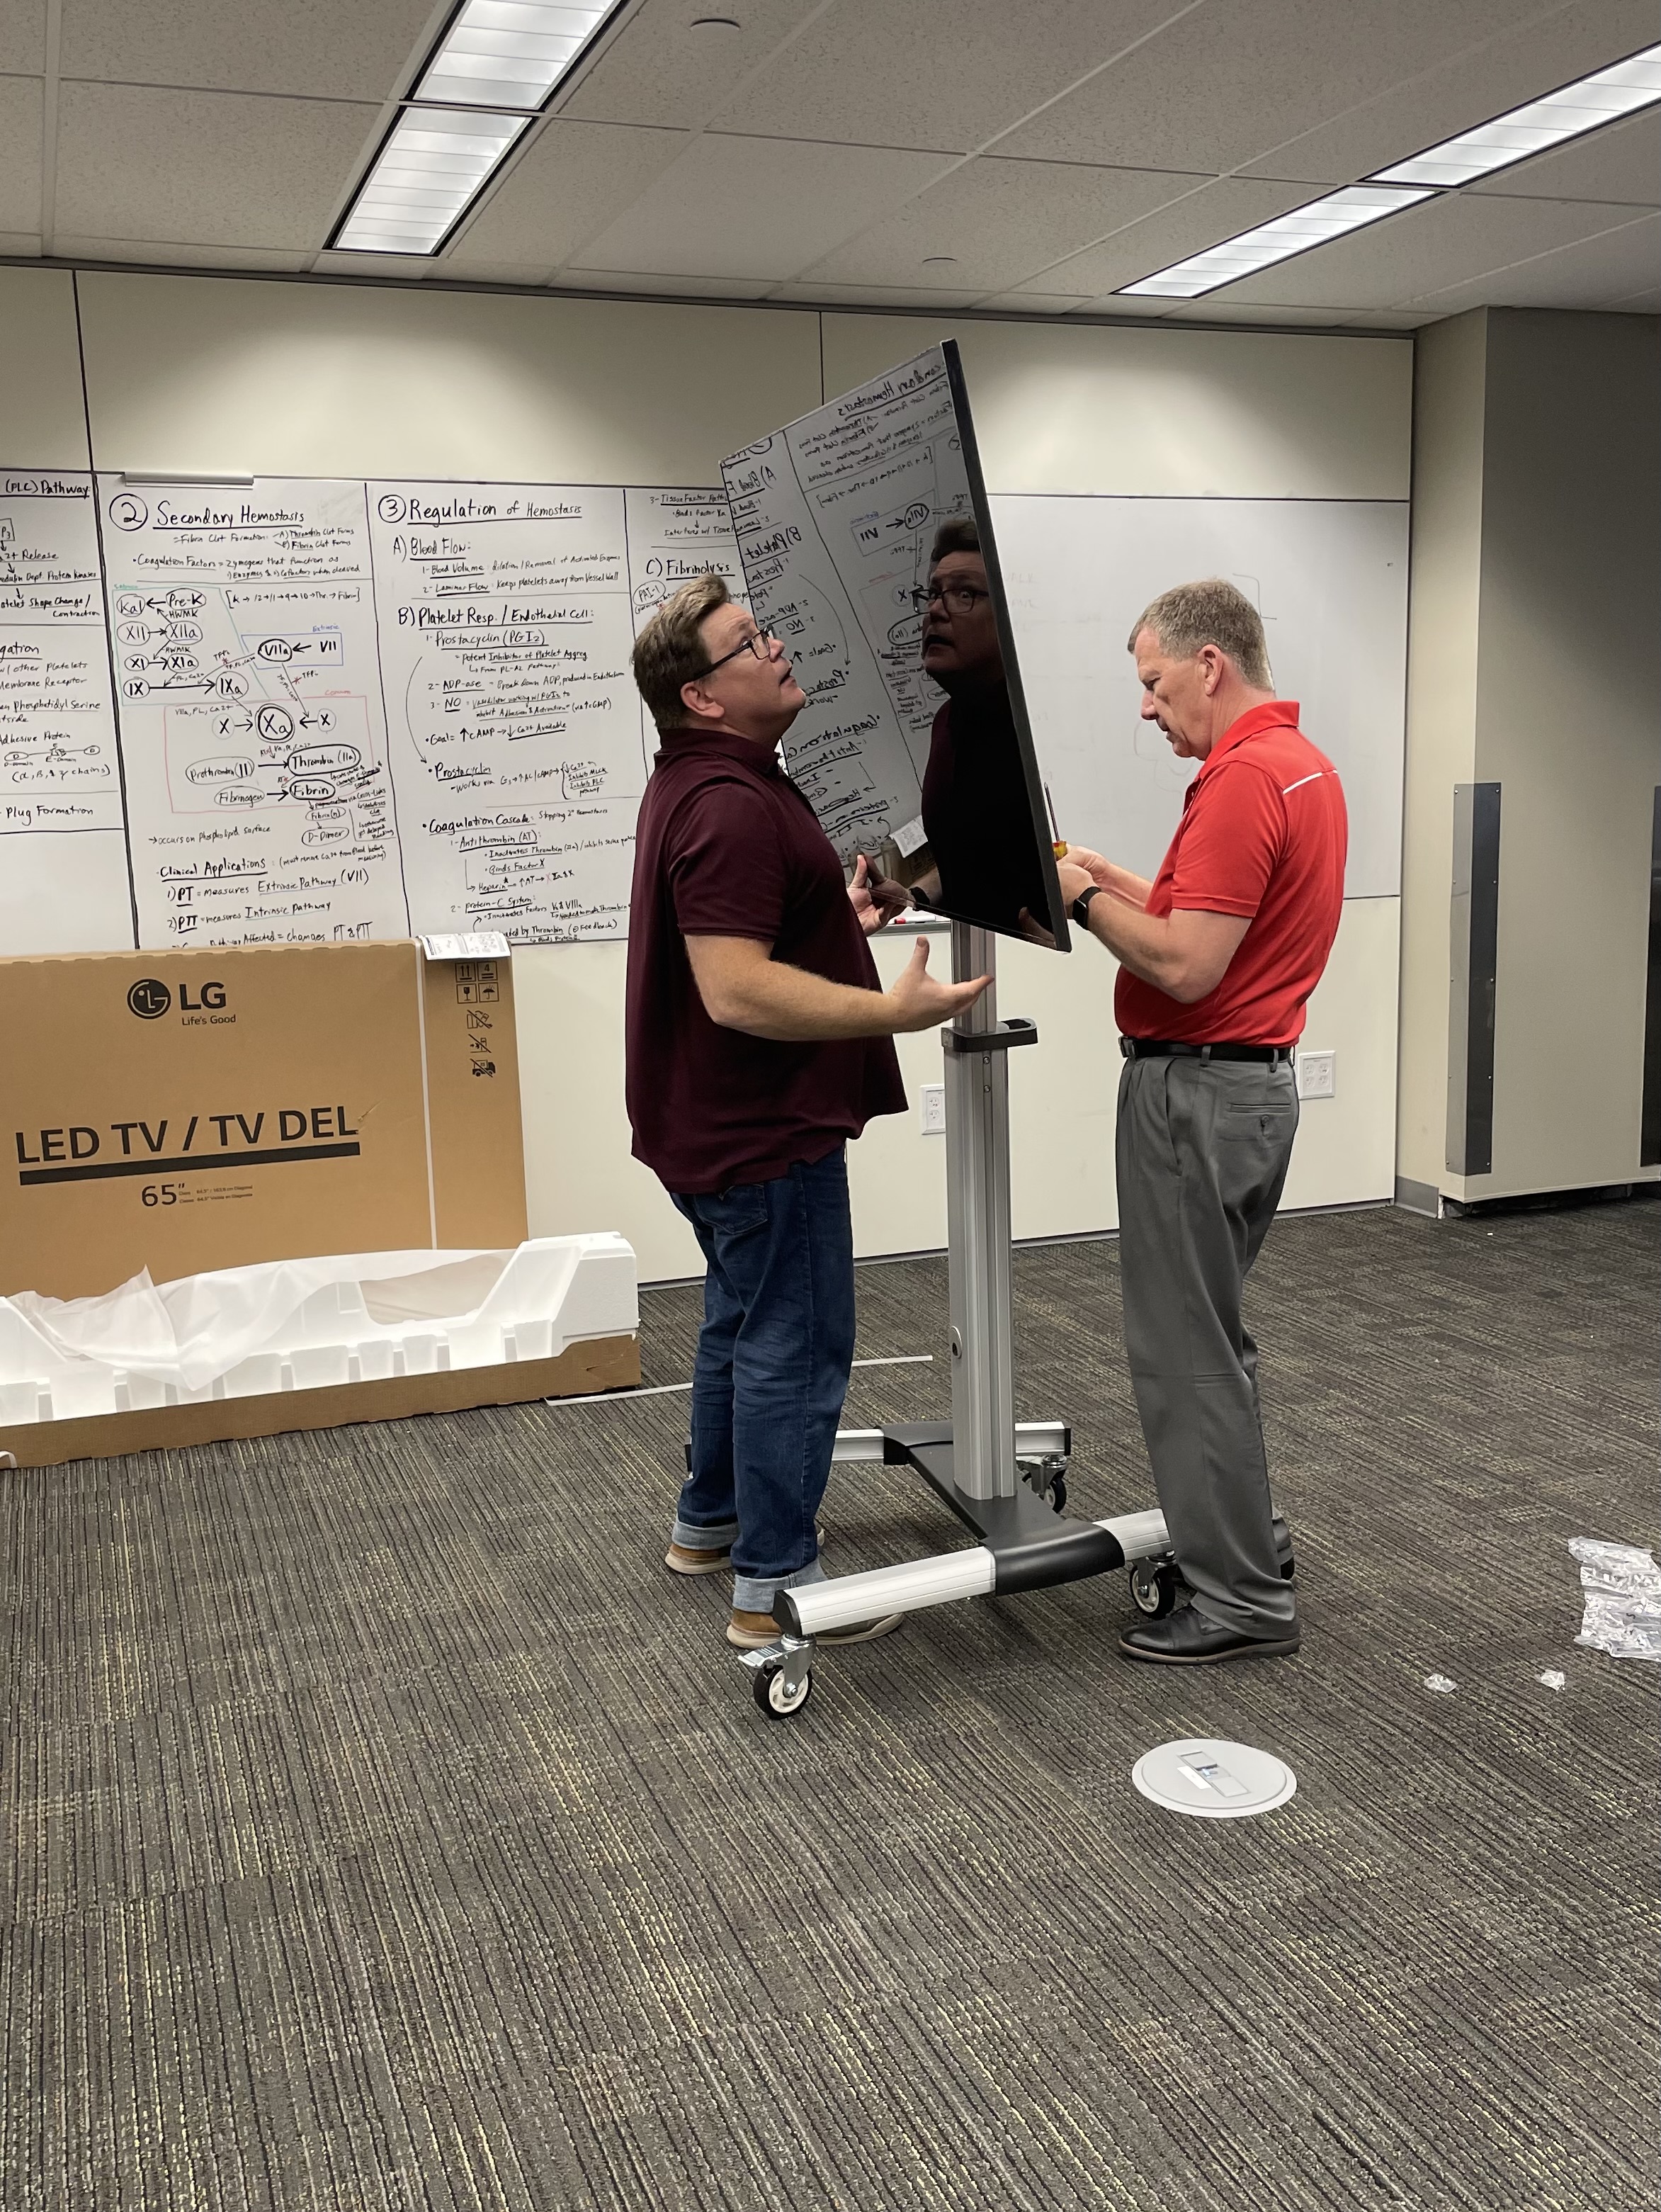 Dr. Doug Danforth and Kellen Maicher from The Ohio State University College of Medicine install a TV in the EdTech Incubator VR Zone.